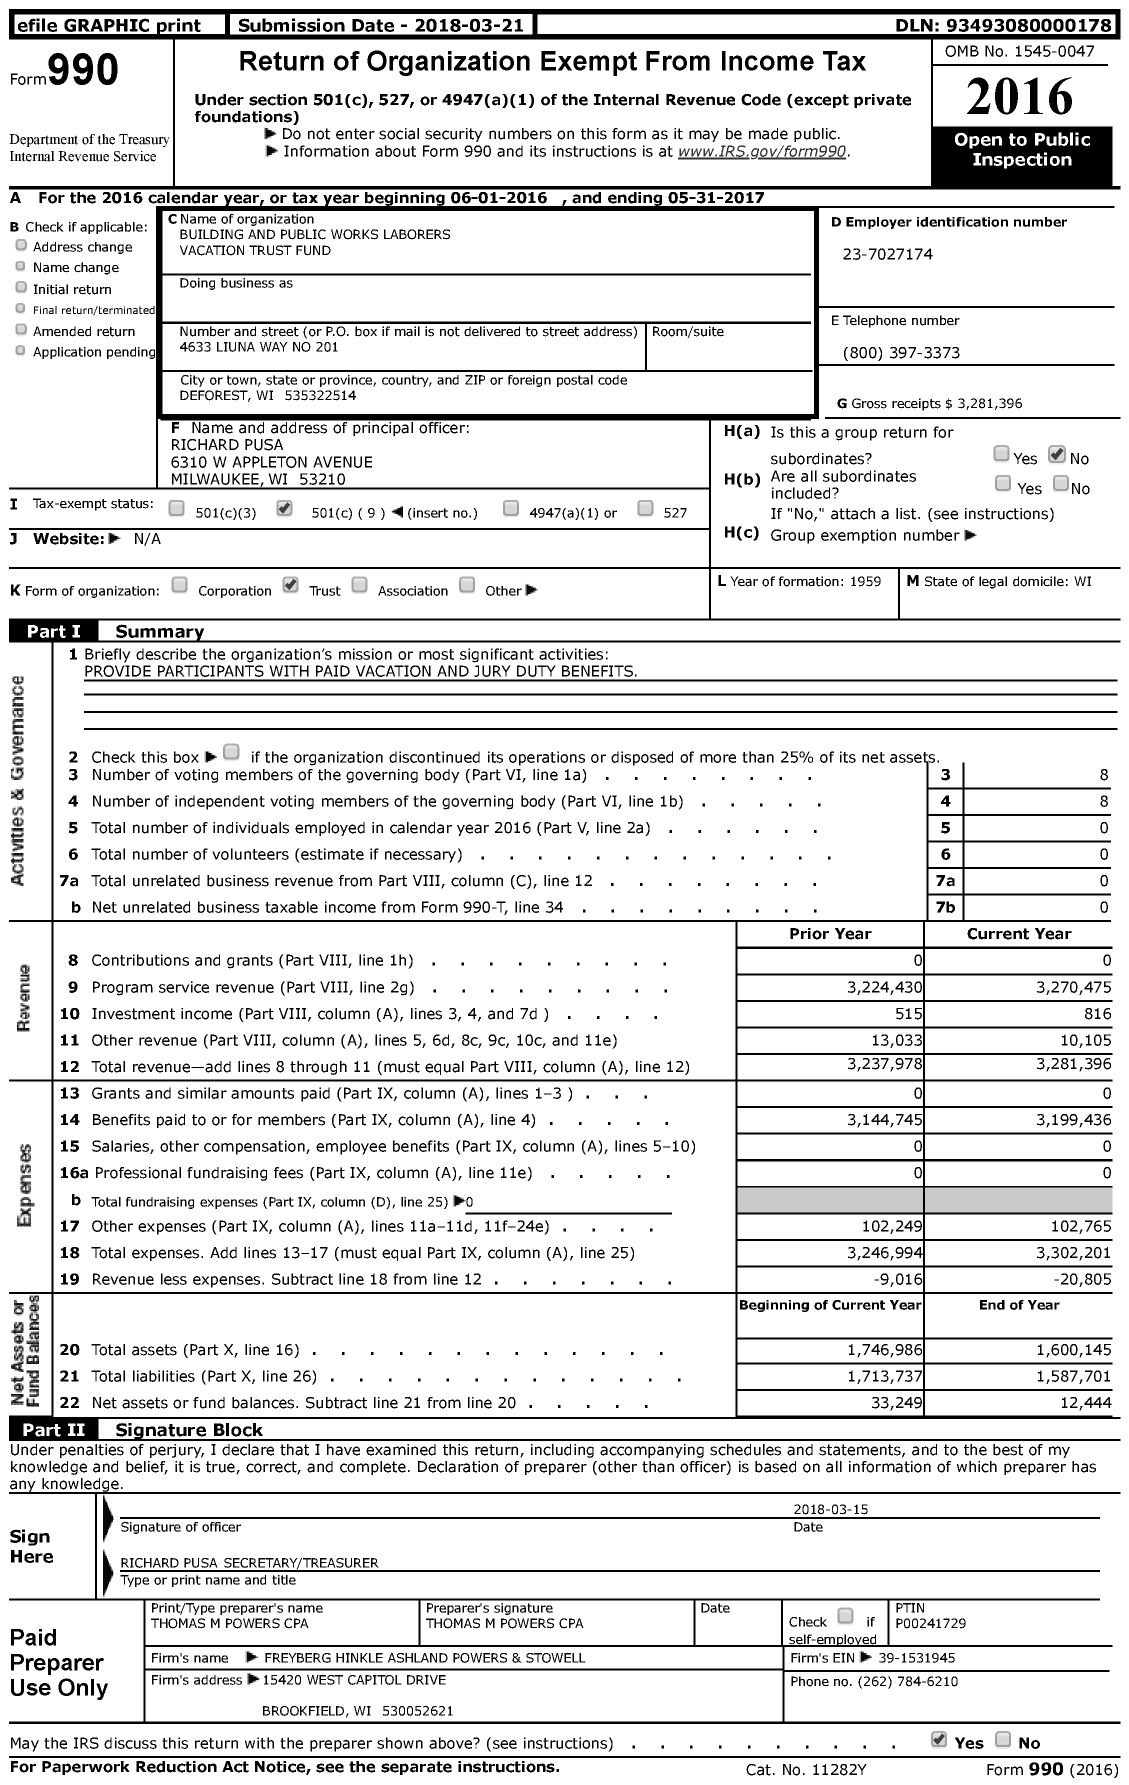 Image of first page of 2016 Form 990 for Building and Public Works Laborers Vacation Trust Fund